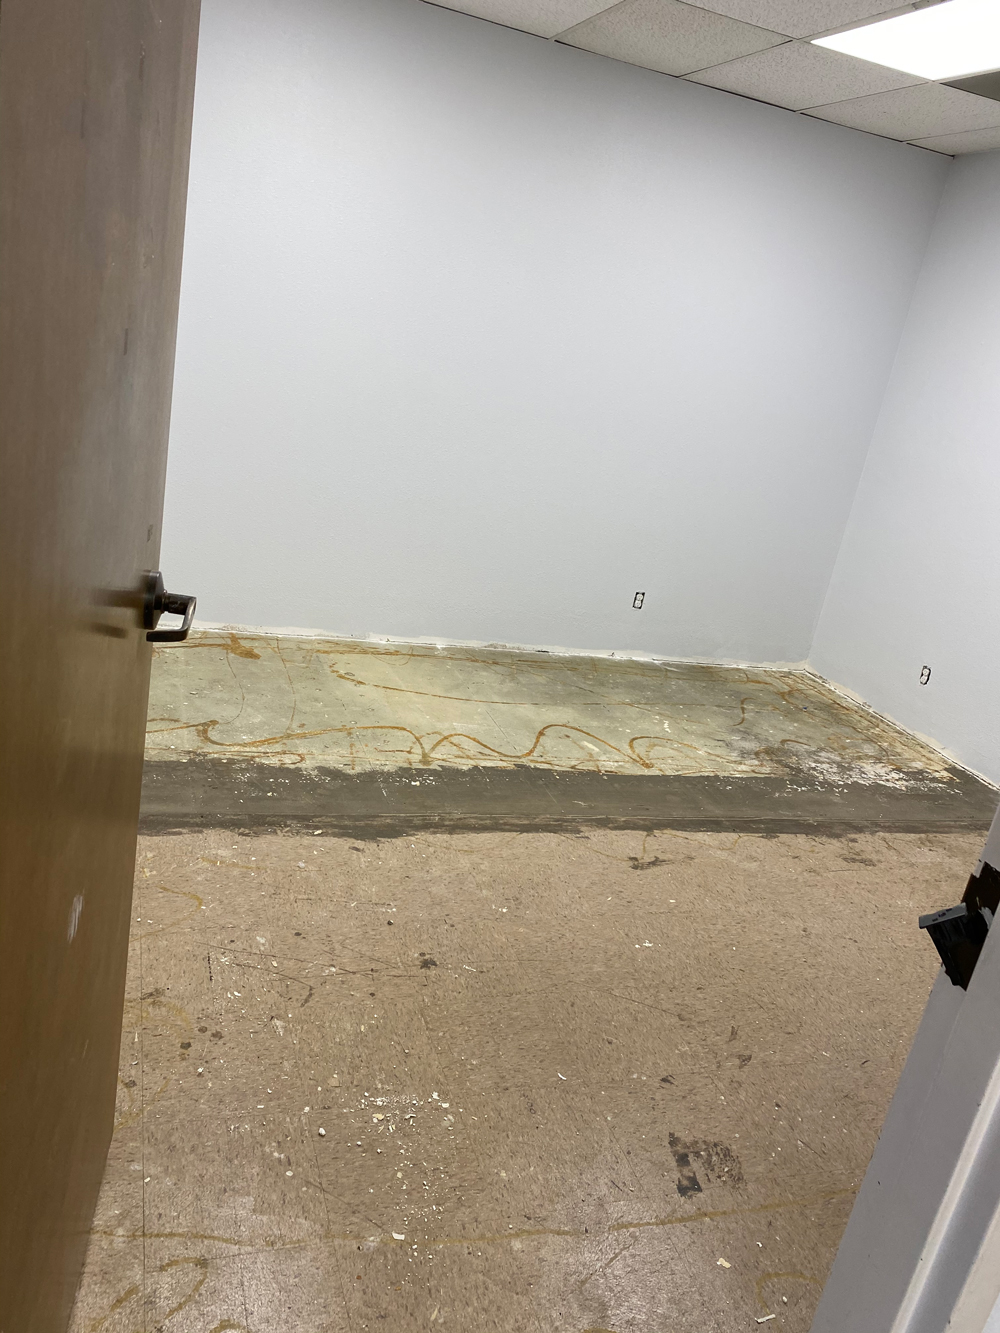 Second Office Room floor being stripped